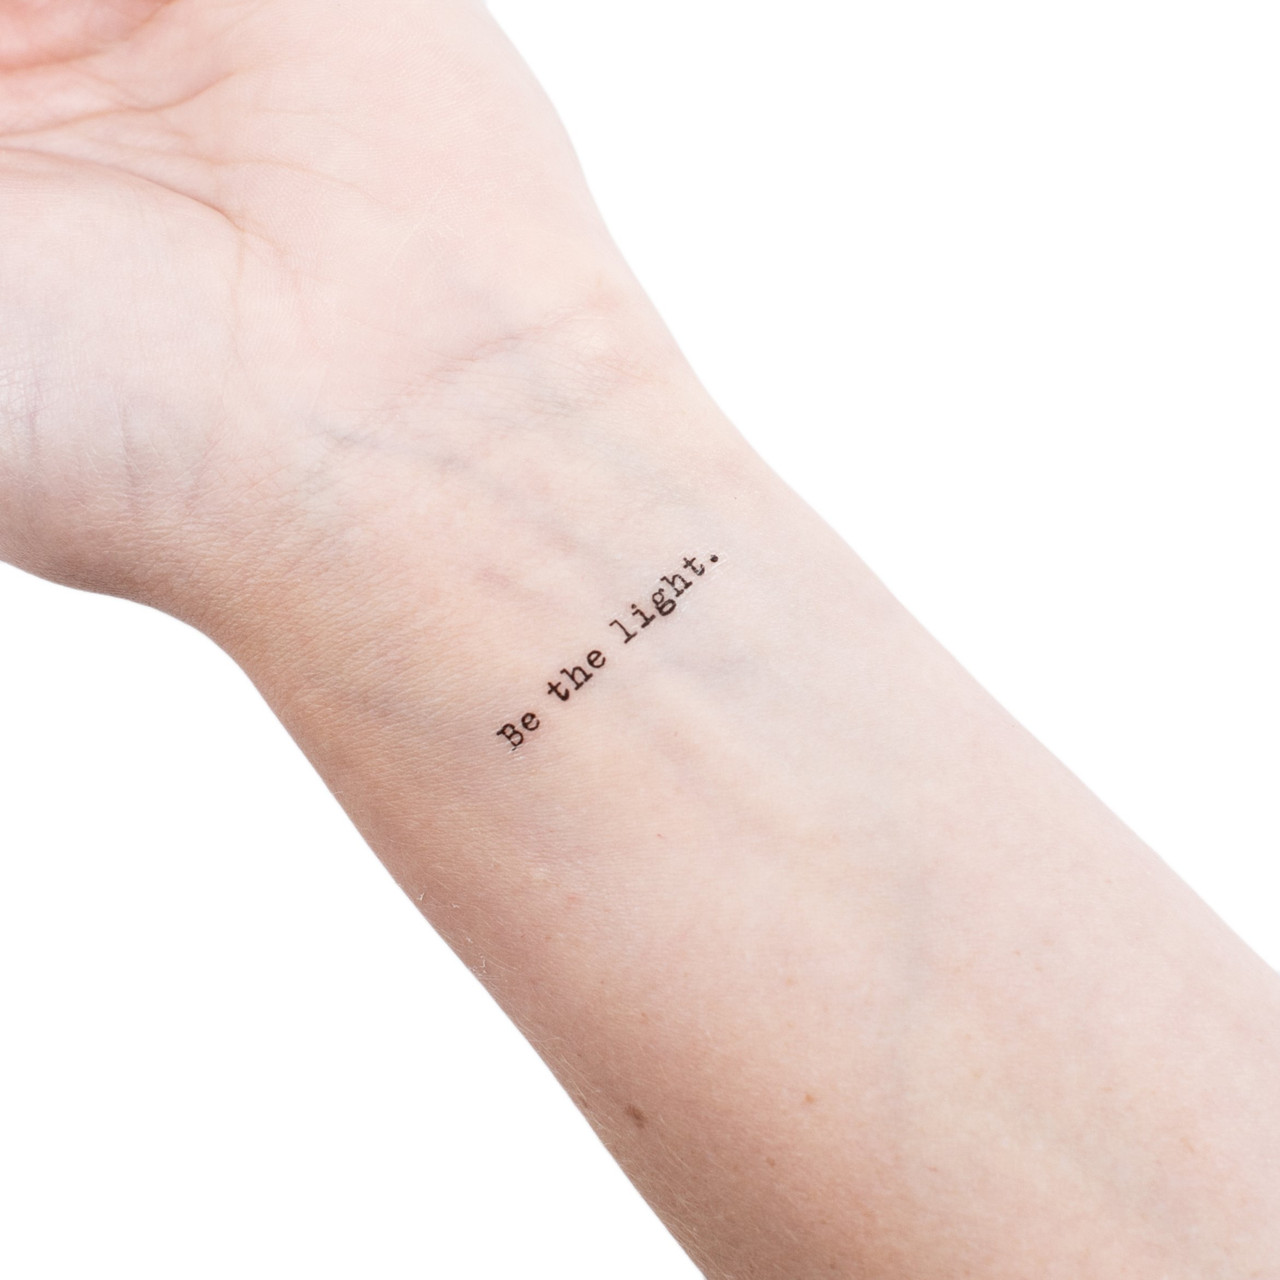 Sugarboo Sayings Temporary Tattoos - Mellow Monkey